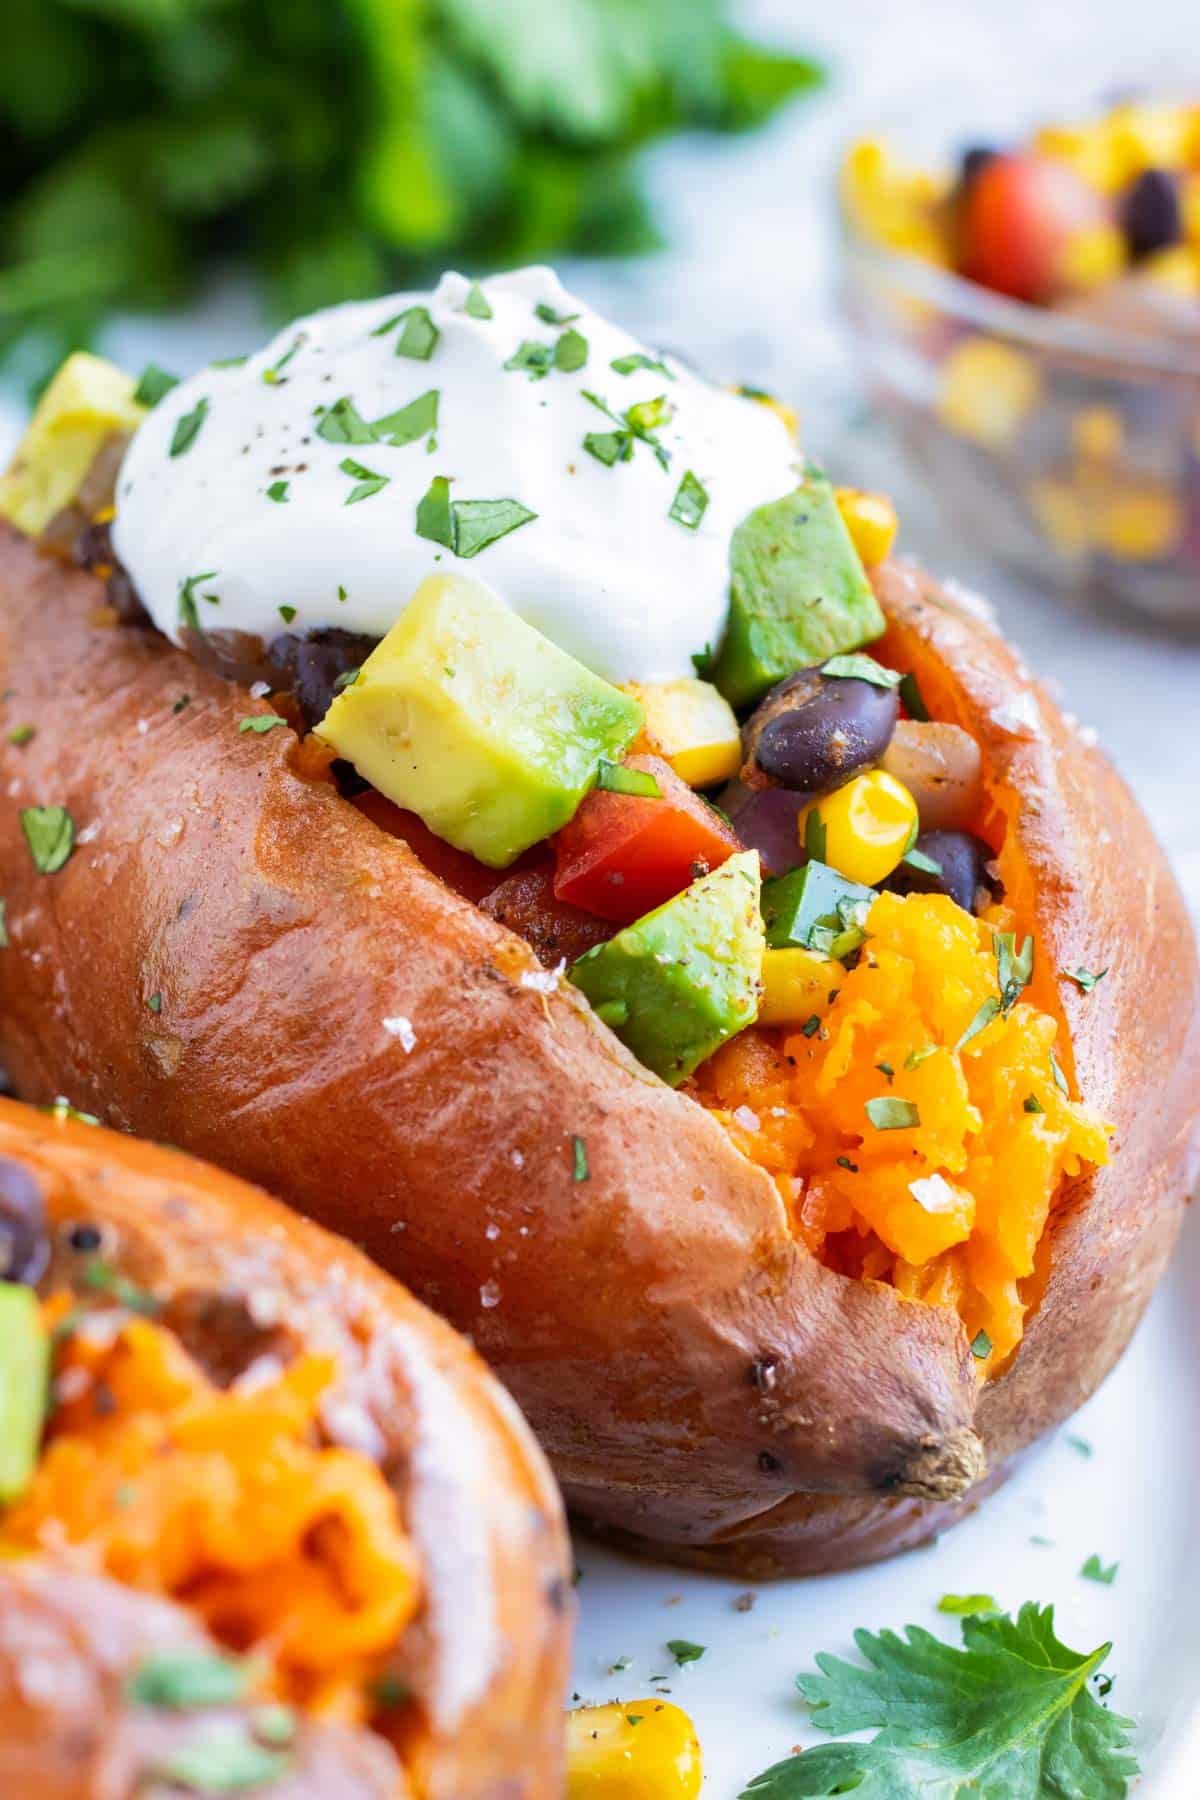 A loaded sweet potato with a Mexican taco filling of black beans, tomatoes, corn, and taco seasoning mix with sour cream on top.